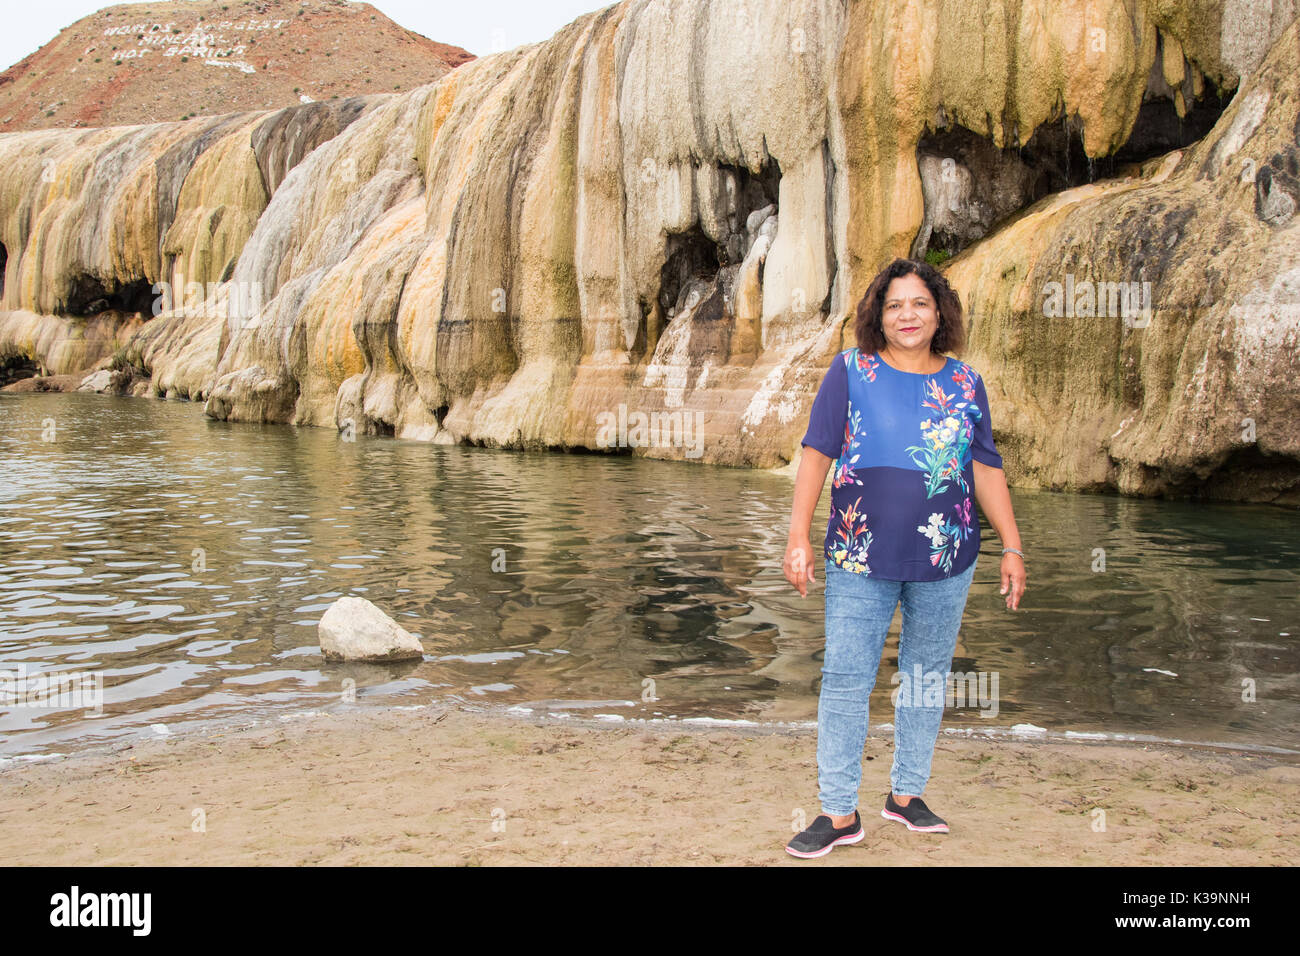 Asian woman posing by a gethermal terrace in Hot Springs State Park, Thermopolis, WY Stock Photo